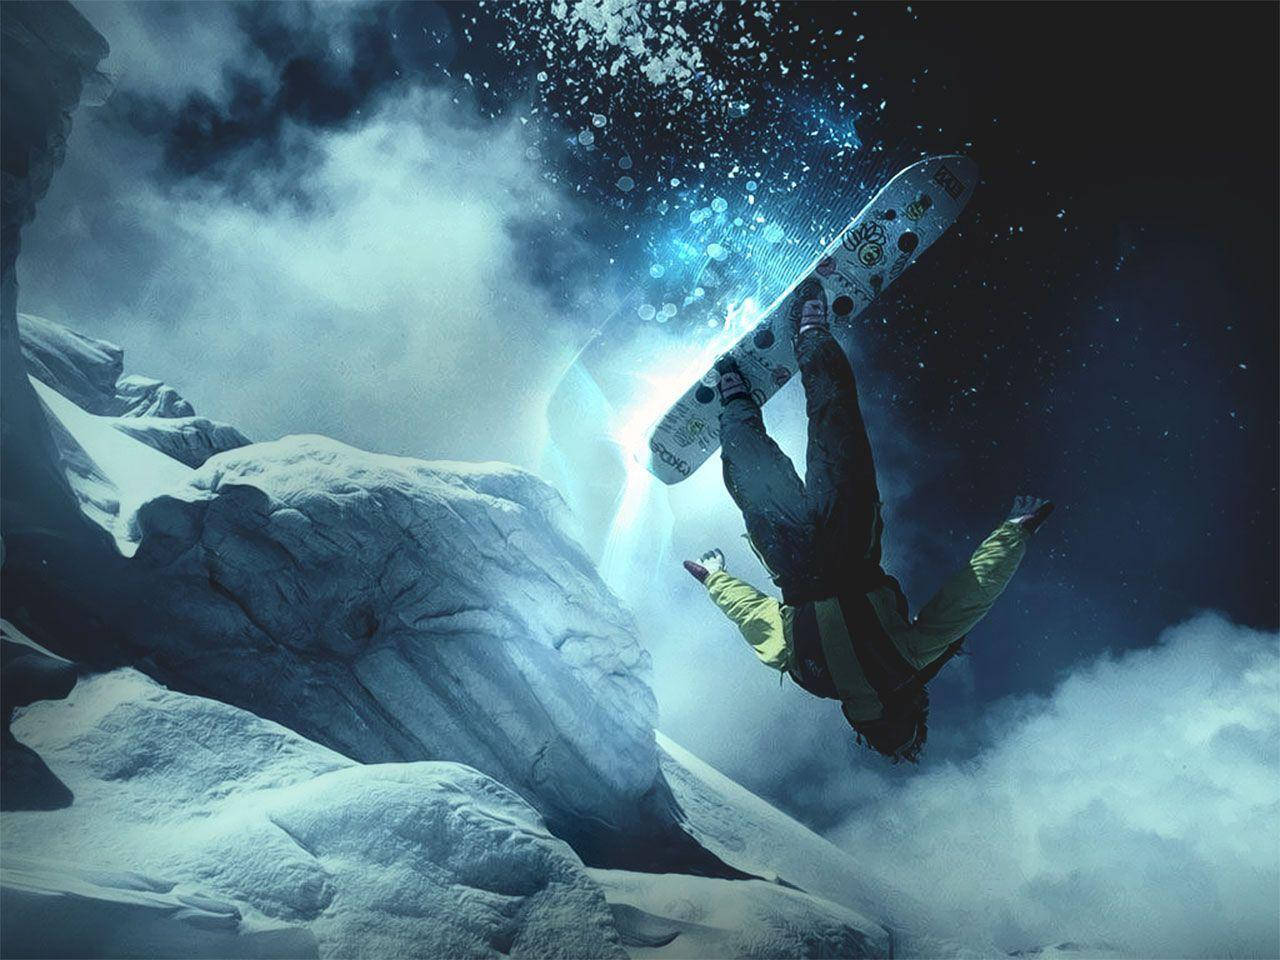 Man In Yellow Does Flip With A Snowboard Picture